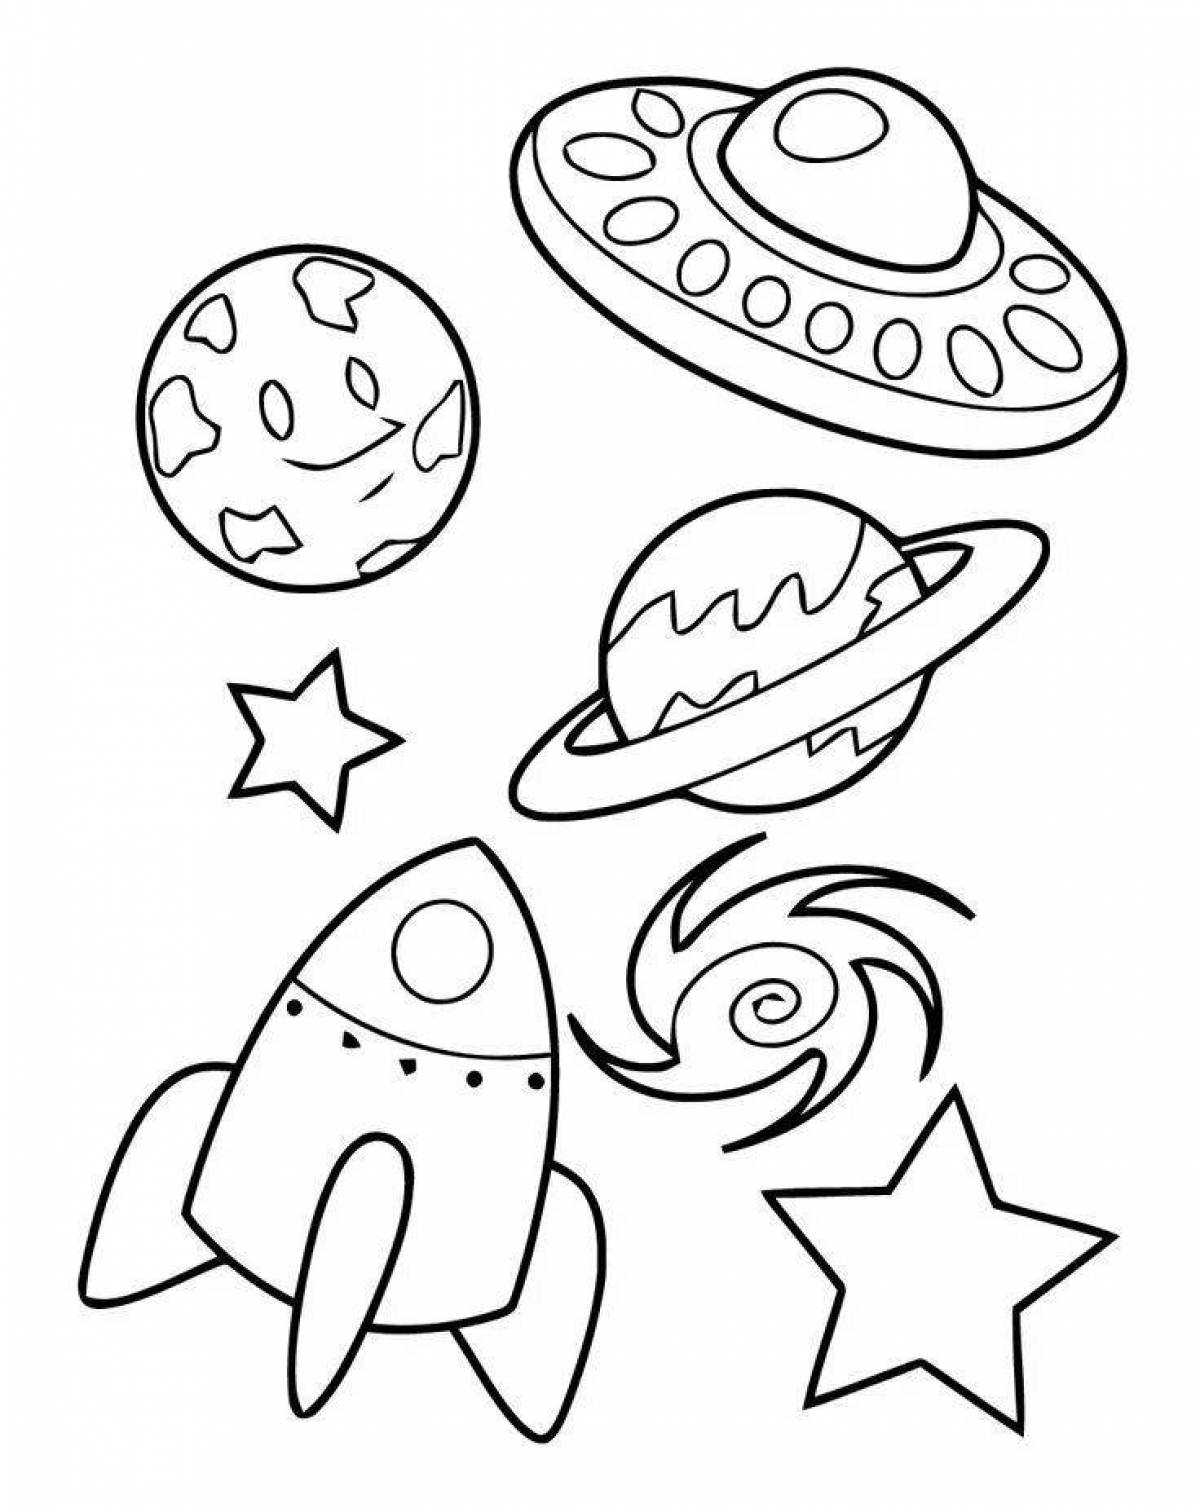 Colorful space coloring book